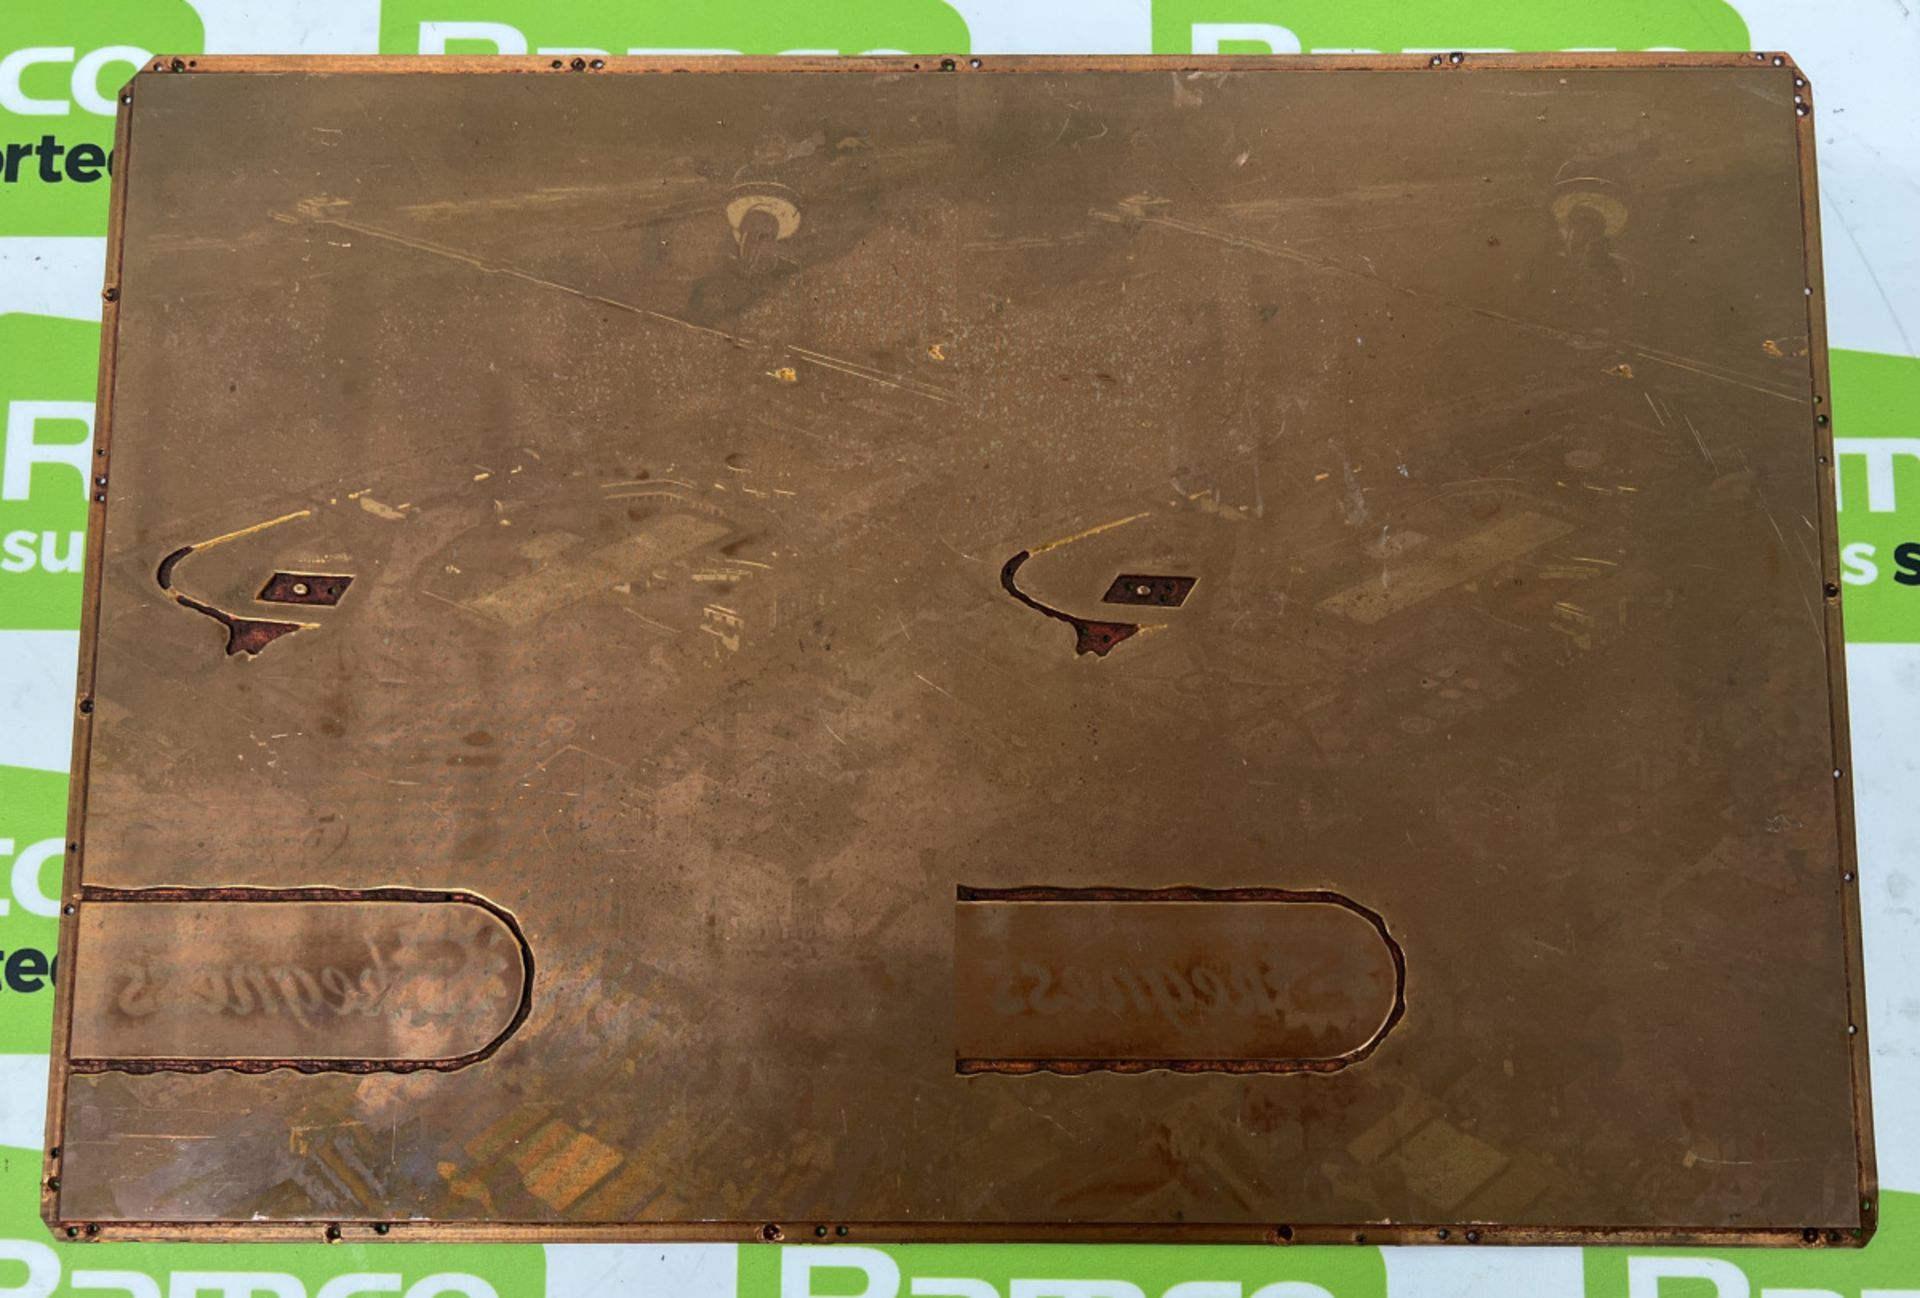 Printing plate with 2 duplicated images showing aerial view of Skegness - overall size 36 x 25 x 0.5